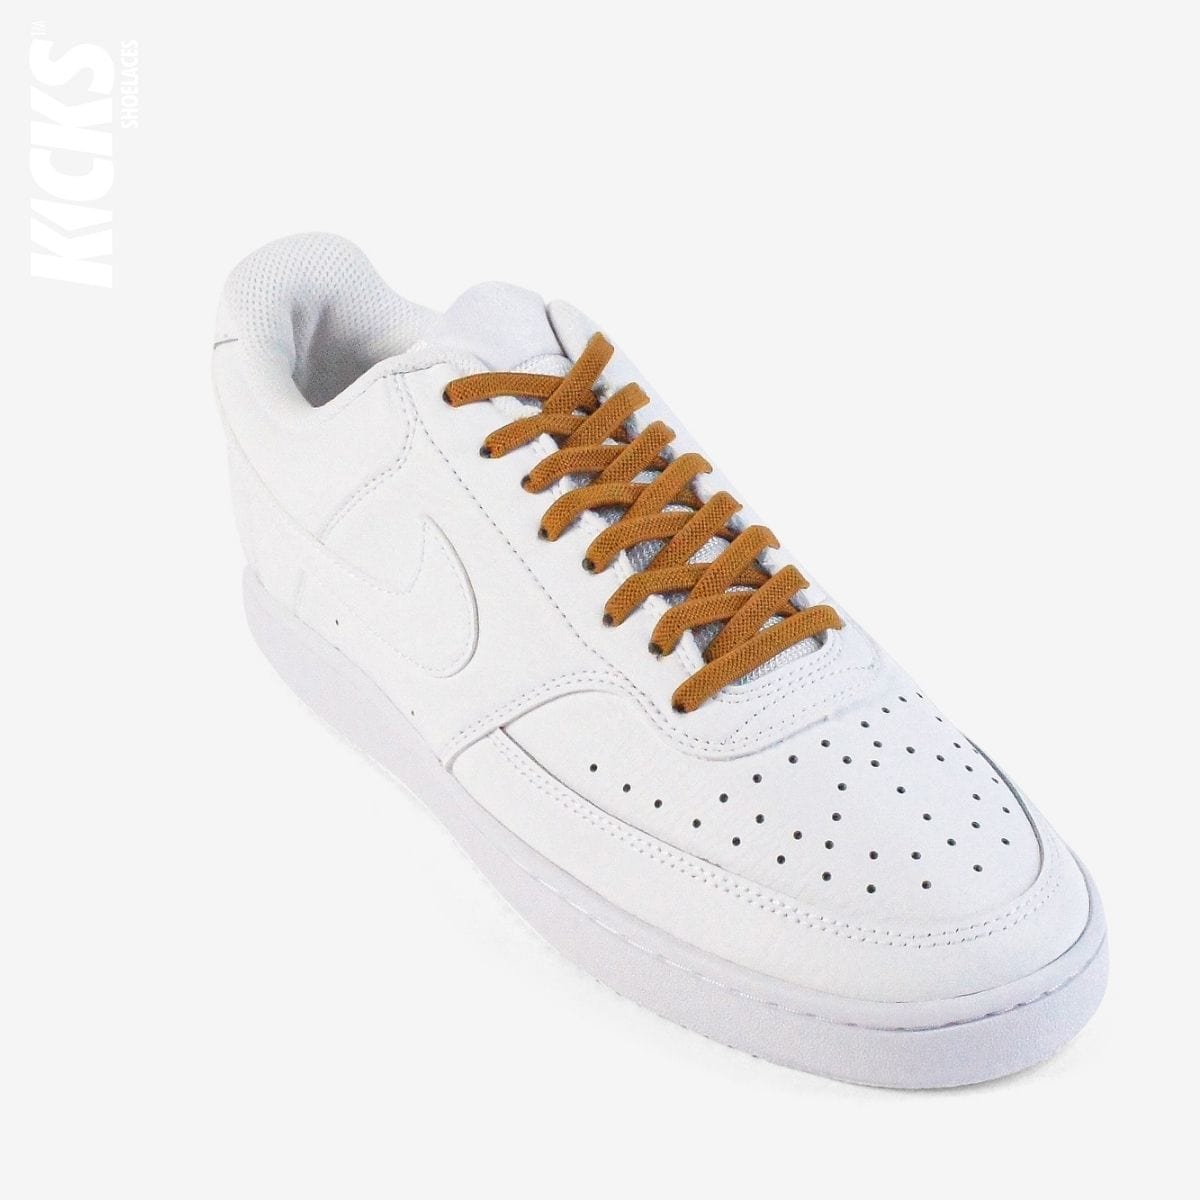 no-tie-shoelaces-with-brown-laces-on-nike-white-sneakers-by-kicks-shoelaces